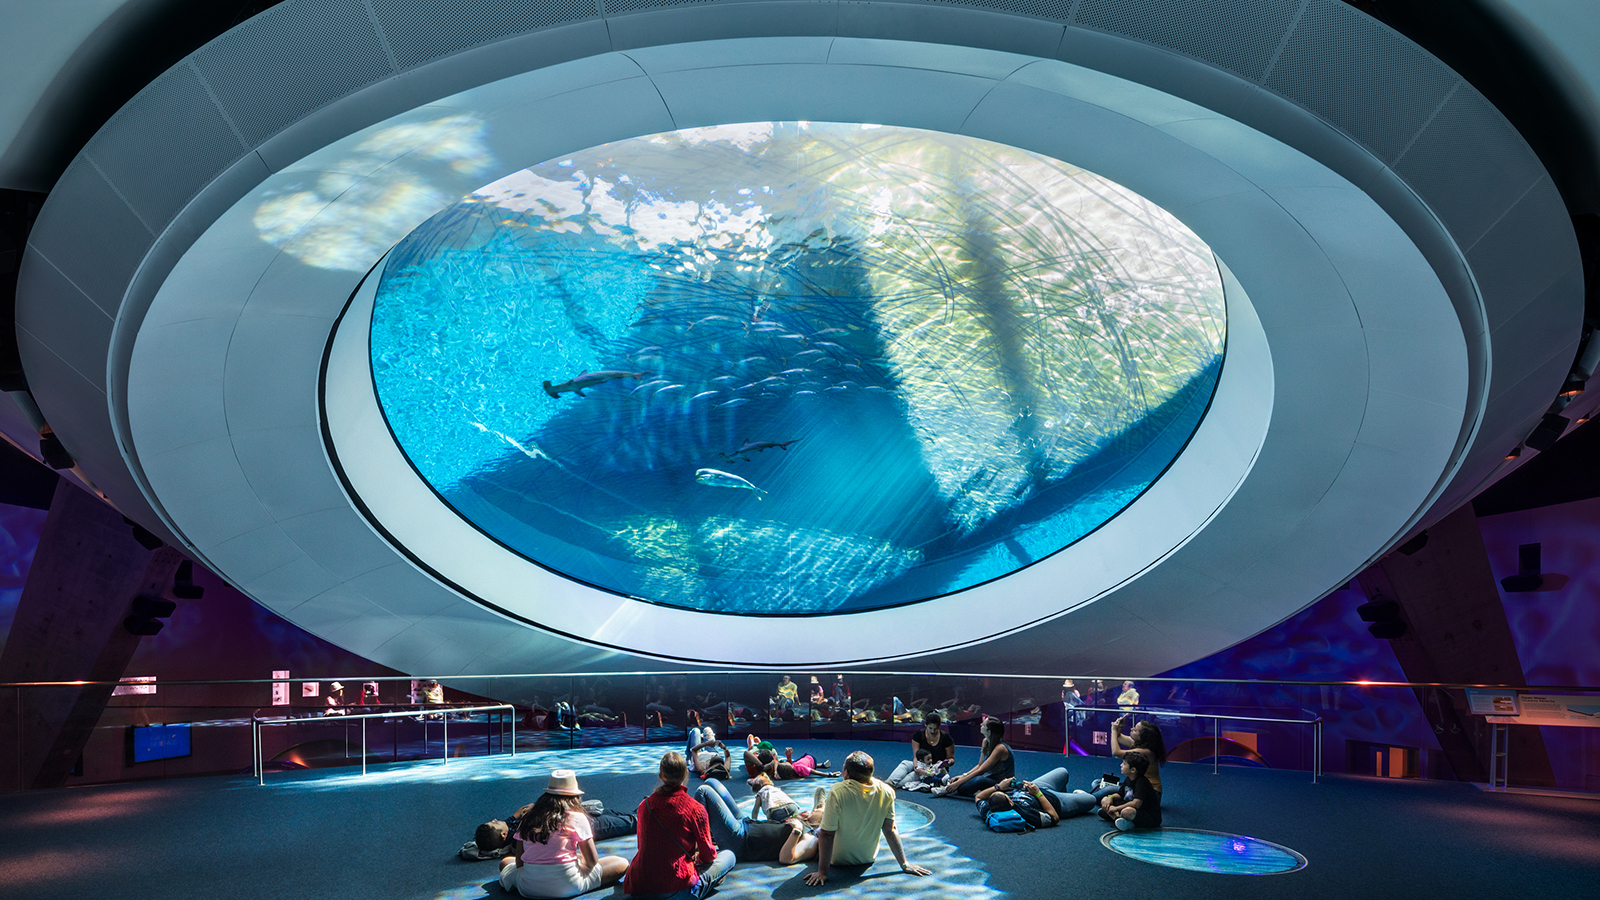 Grimshaw Frost Museum, a large window in the bottom of an aquarium tank, guests sit under the window observing fish.